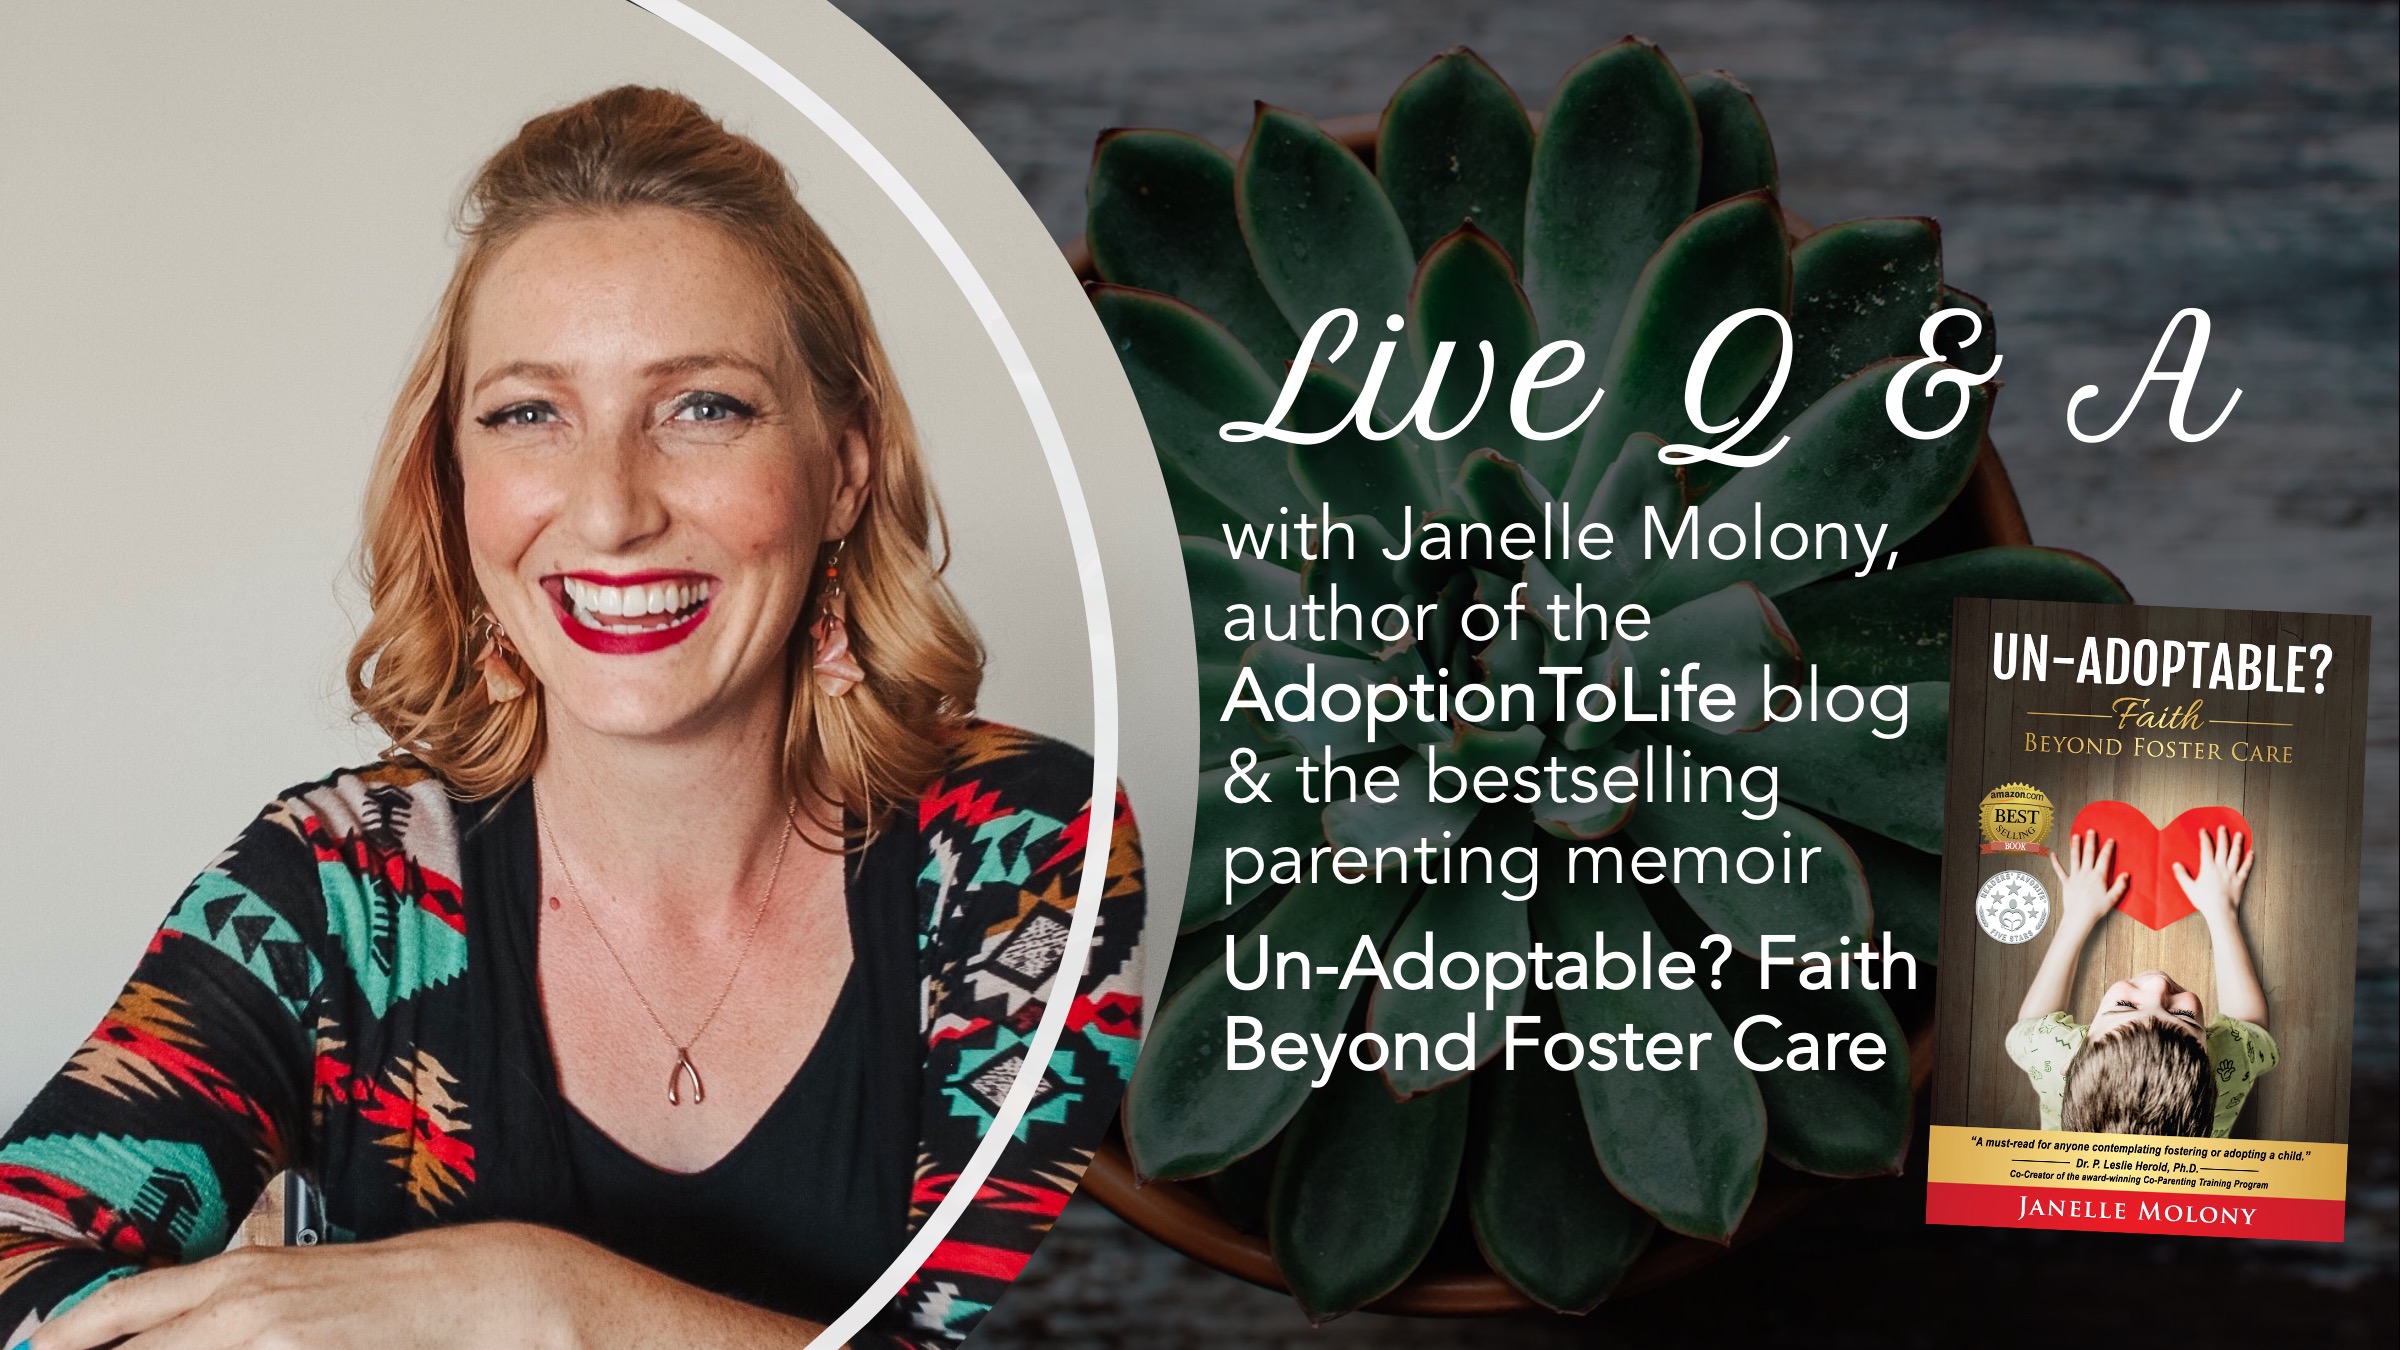 Adoptive Mom and Author in Live Q & A Session